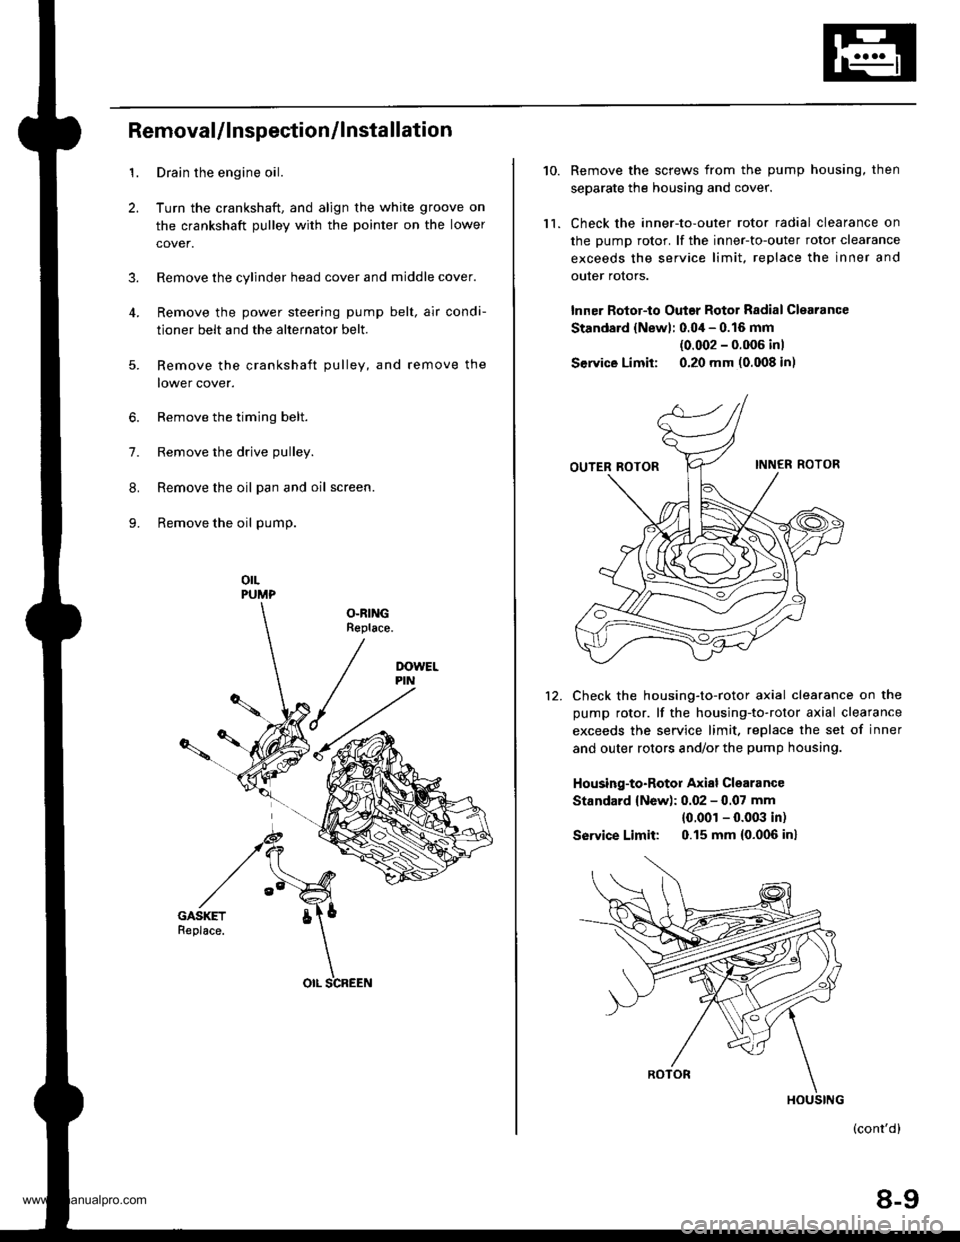 HONDA CR-V 1999 RD1-RD3 / 1.G Owners Guide 
1.
2.
3.
RemovaUlnspection/lnstallation
Drain the engine oil.
Turn the crankshaft, and align the white groove on
the crankshaft pulley with the pointer on the lower
cover.
Remove the cylinder head co